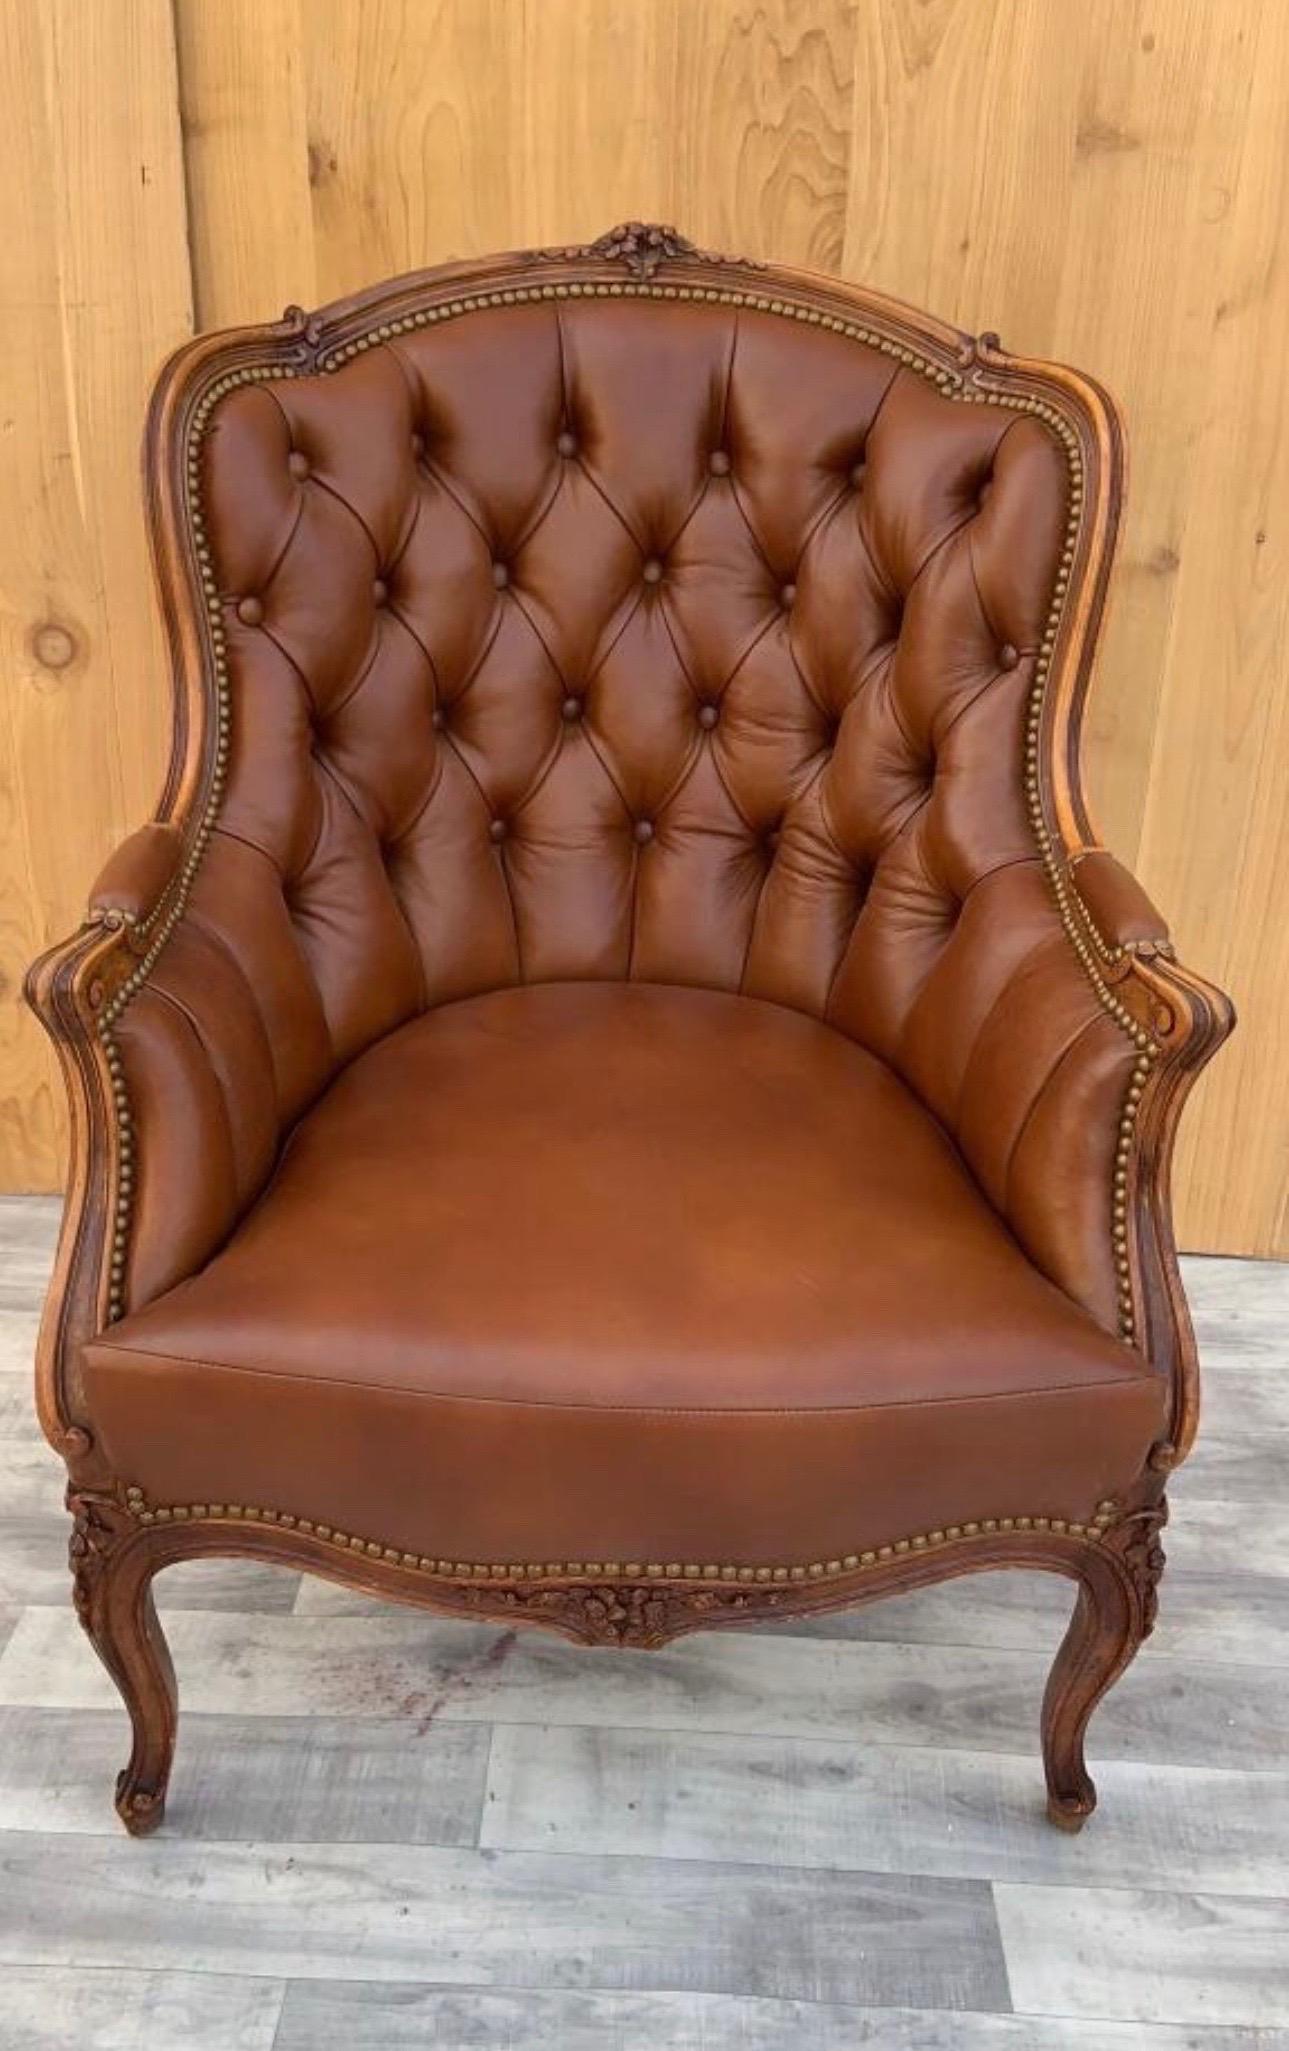 Antique French Provincial Hand Carved Walnut Bergere Chair Newly Upholstered In Full-Grain 